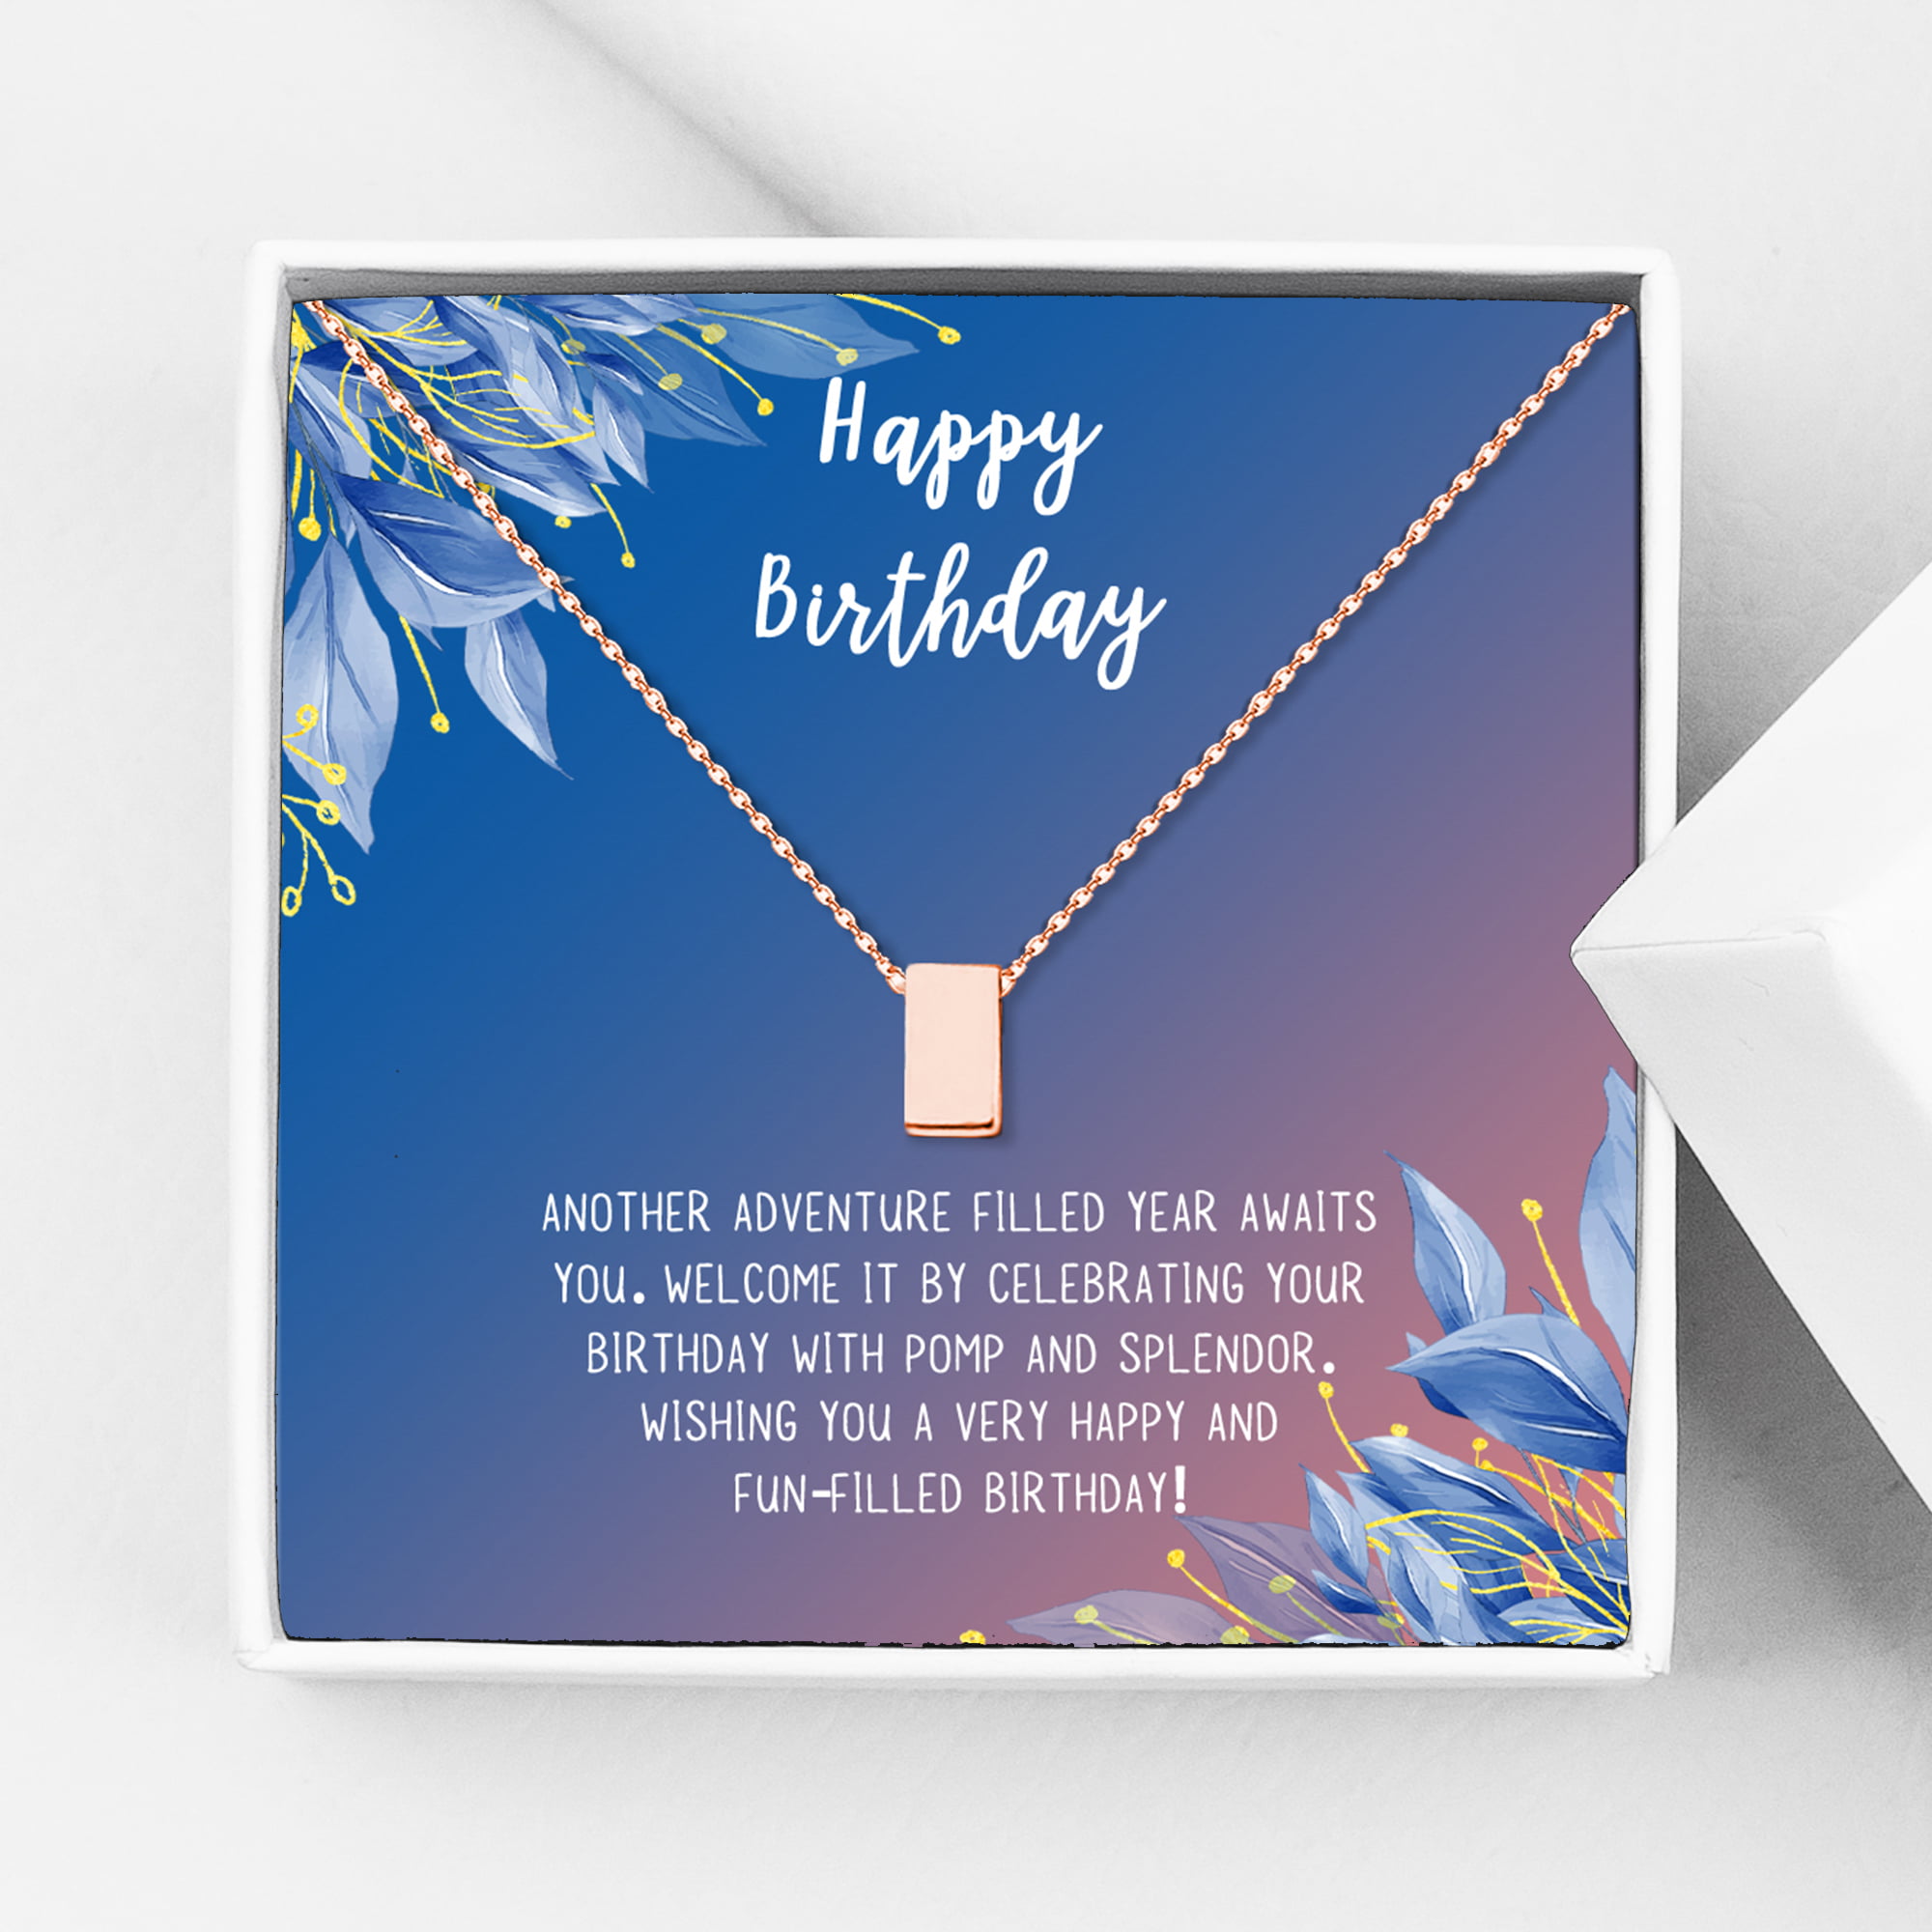 Details about   Personalized mother day gifts for mum her birthday remembrance frame card show original title 